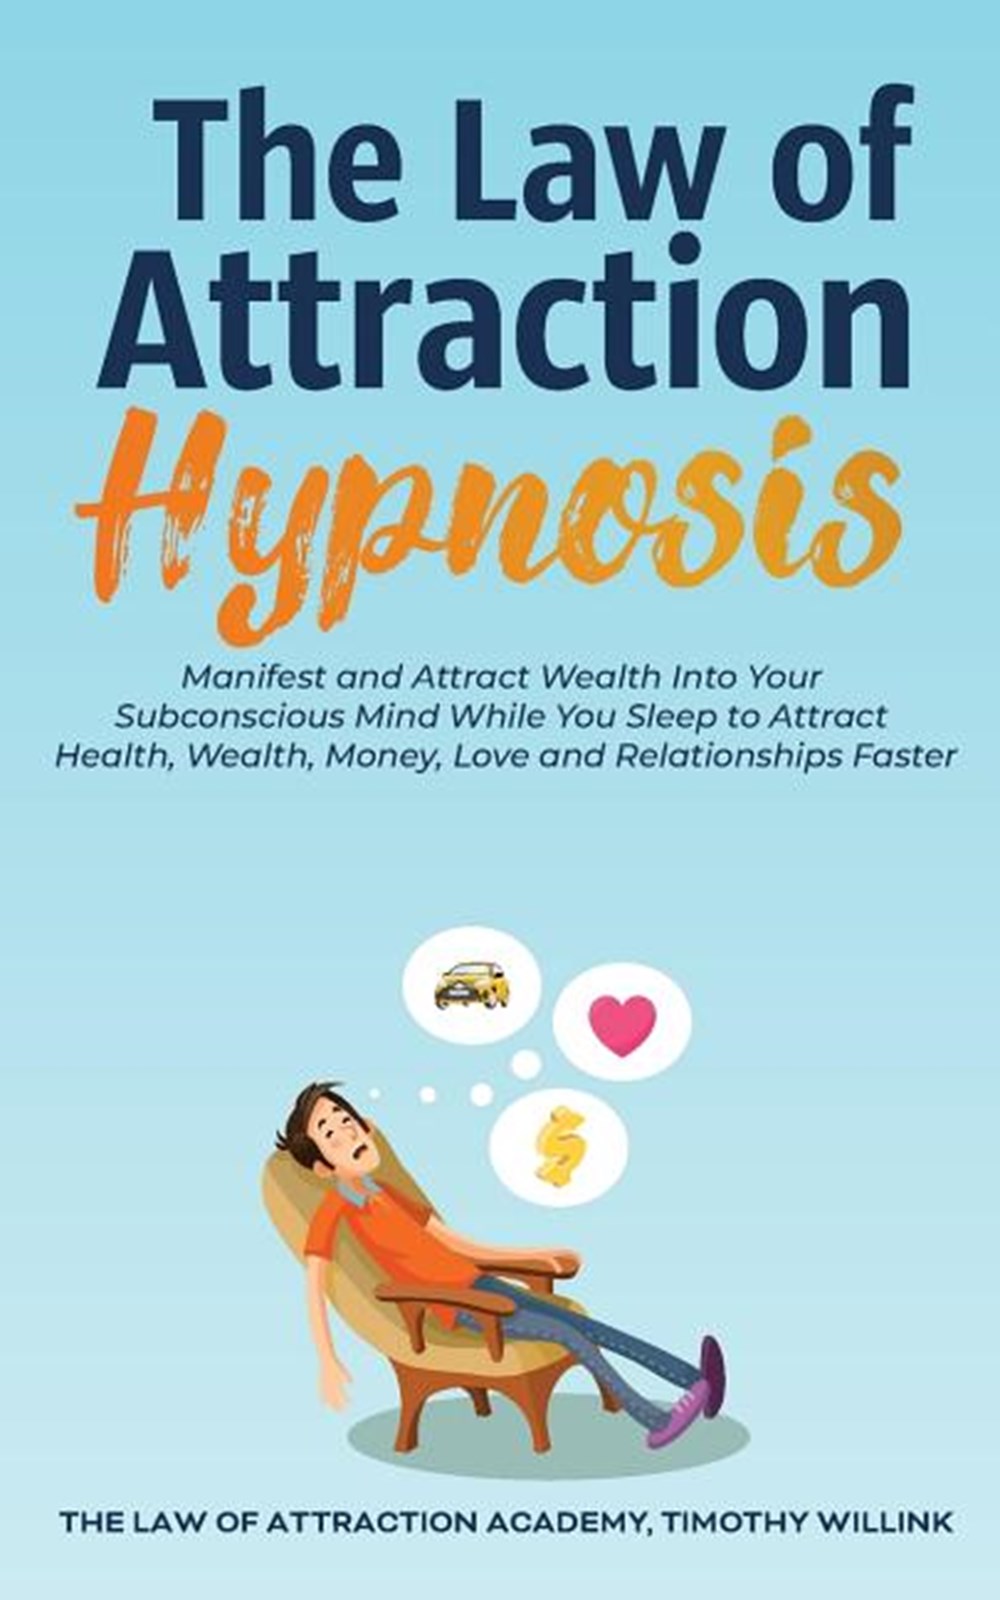 Law of Attraction Hypnosis: Manifest and Attract Wealth Into Your Subconscious Mind While You Sleep 